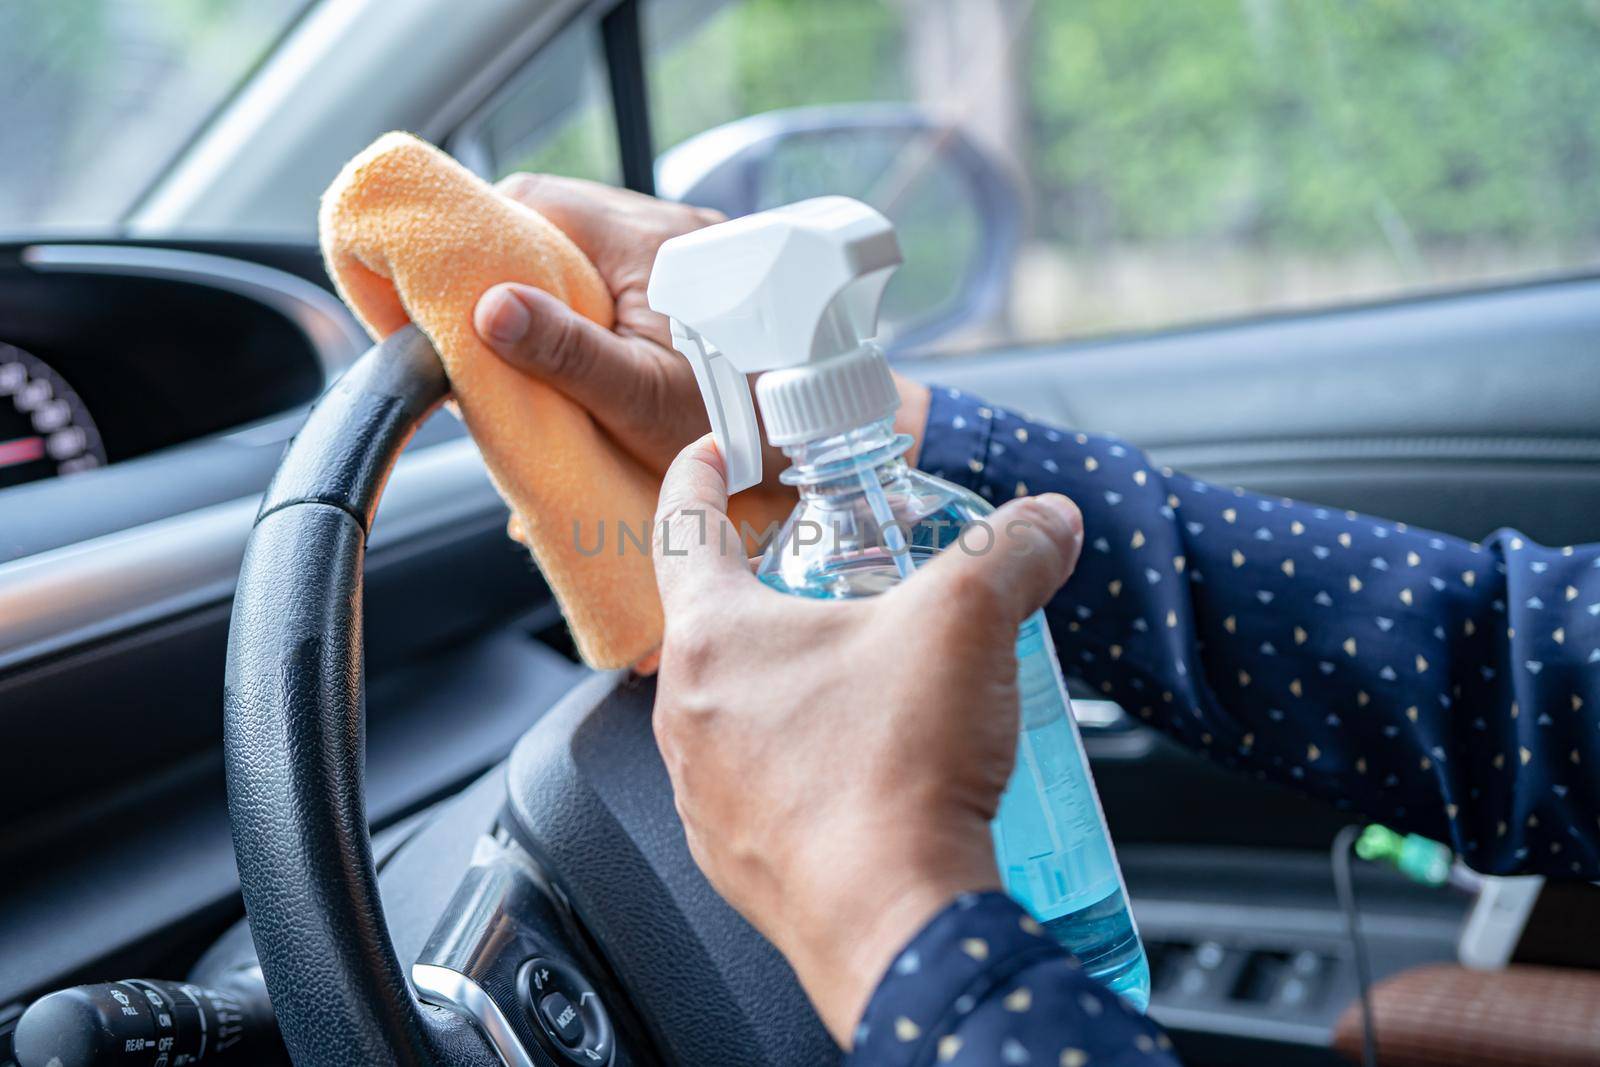 New Normal, Asian working woman clean in car by press blue alcohol sanitizer gel for protect safety Coronavirus.